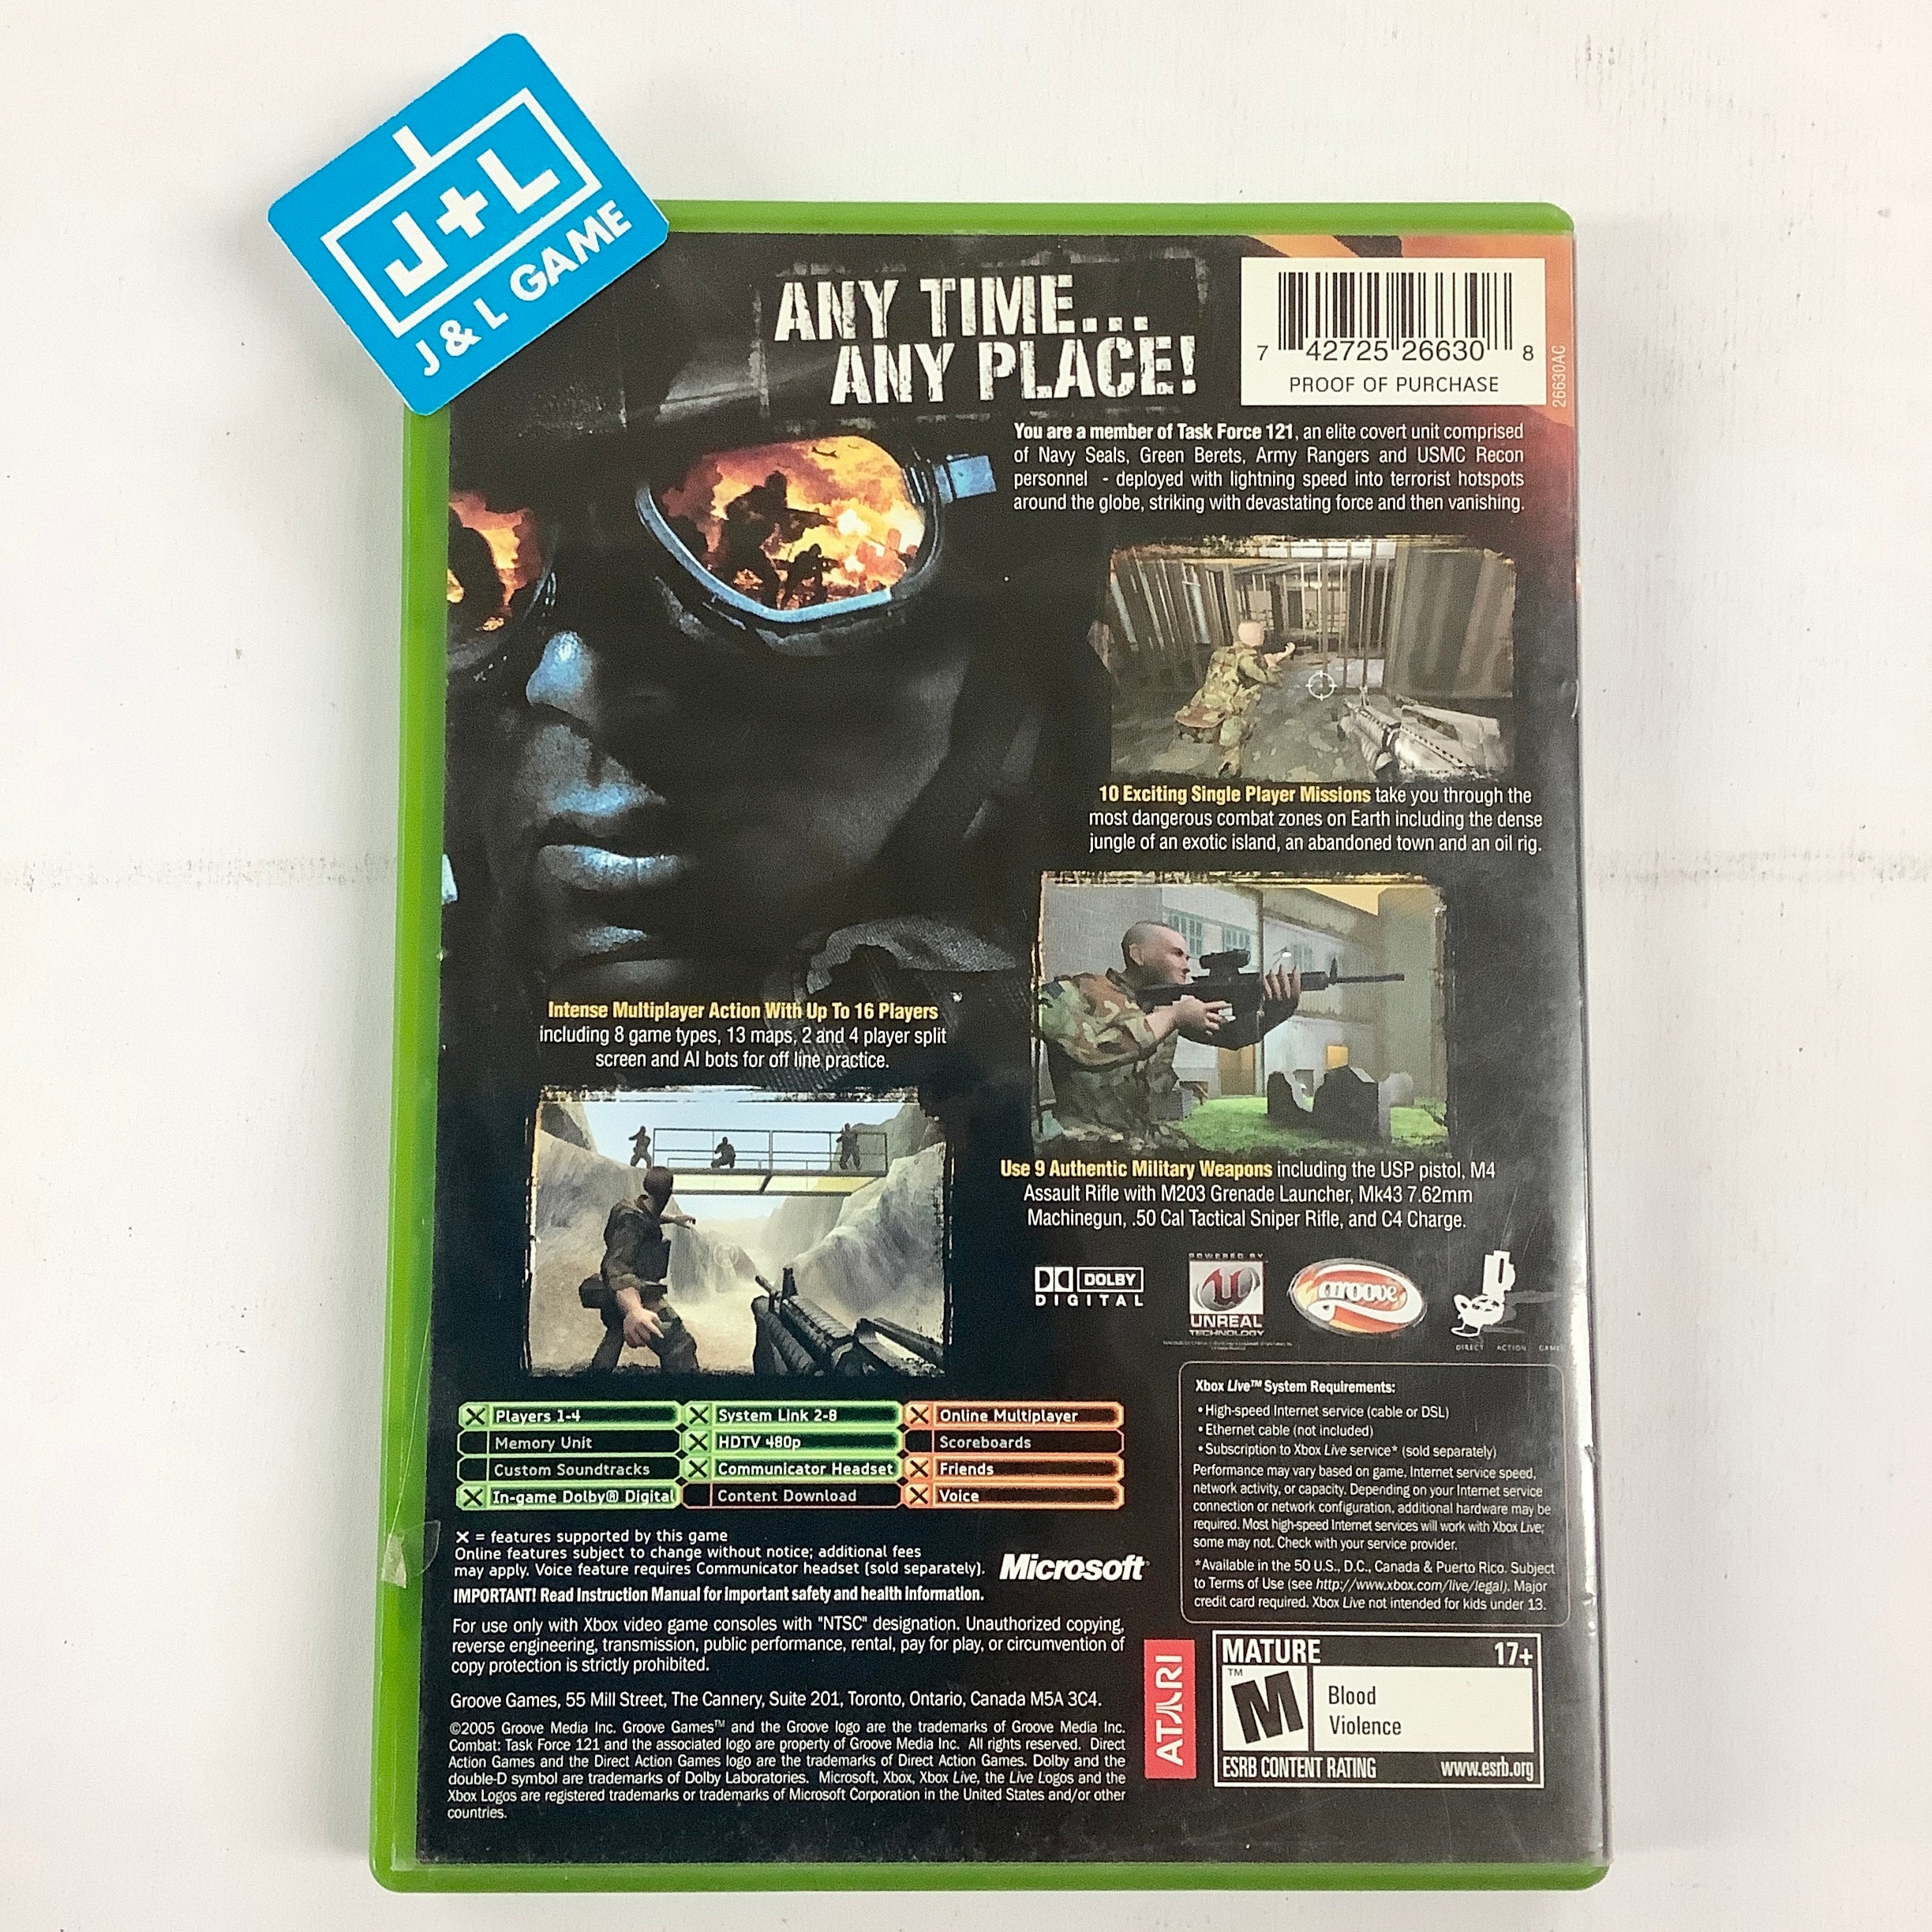 Combat: Task Force 121 - (XB) Xbox [Pre-Owned] Video Games Groove Games   